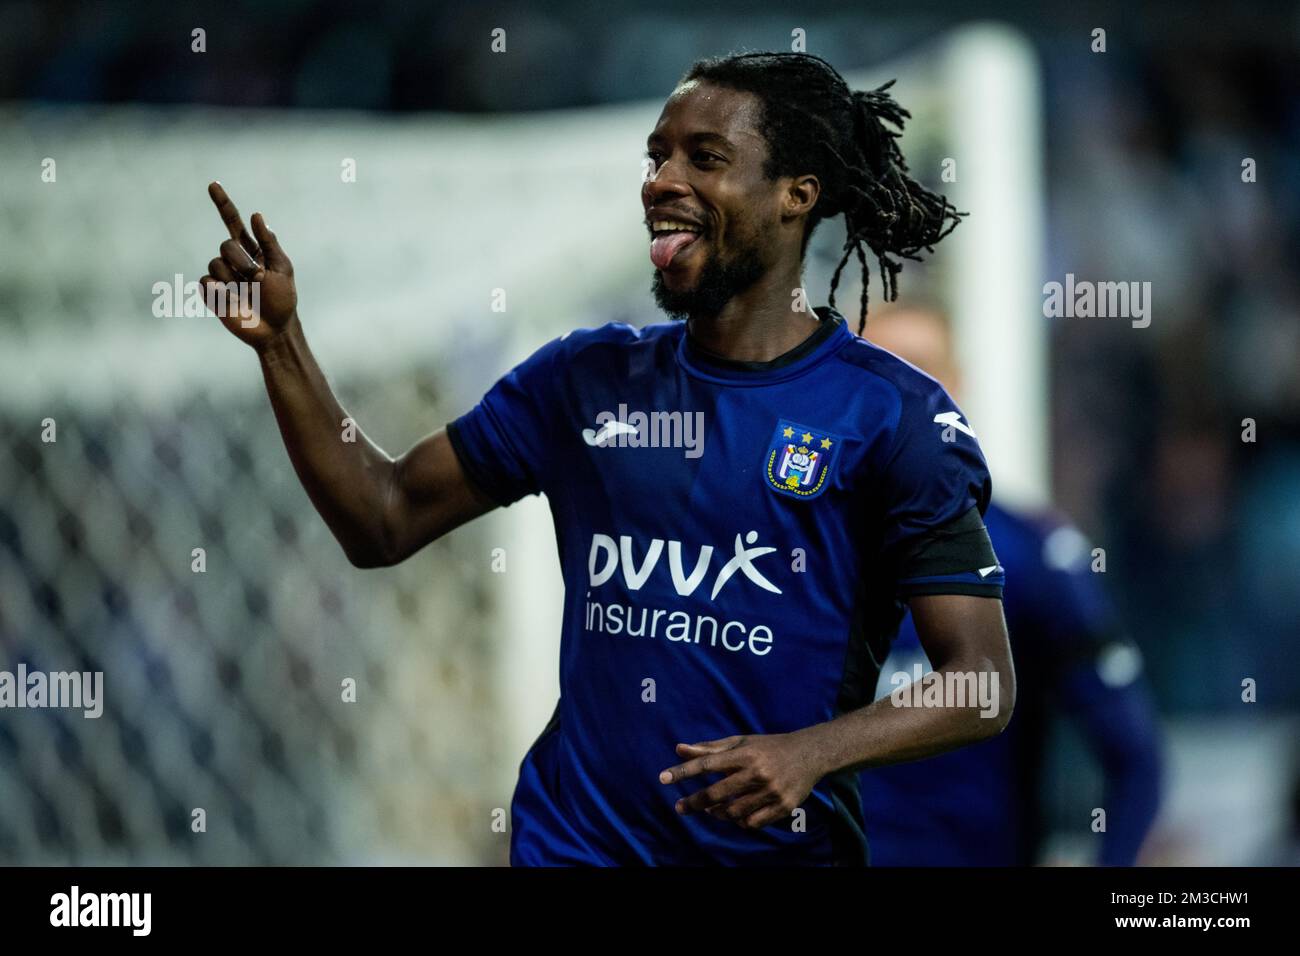 Anderlecht's Majeed Ashimeru celebrates after scoring during a soccer match between RSCA Anderlecht and KV Kortrijk, Sunday 18 September 2022 in Anderlecht, on day 9 of the 2022-2023 'Jupiler Pro League' first division of the Belgian championship. BELGA PHOTO JASPER JACOBS Stock Photo